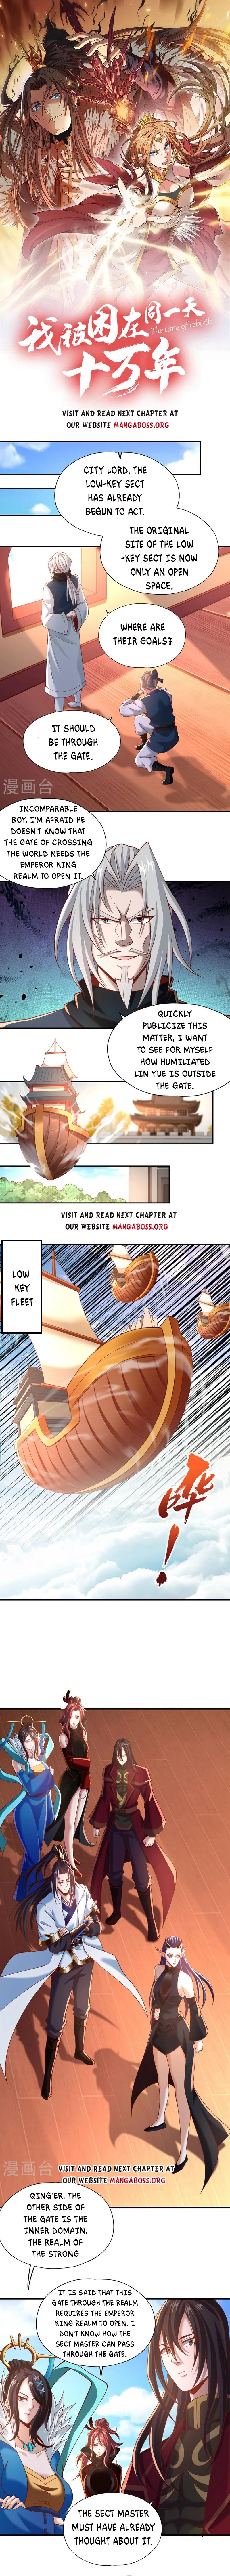 The Time Of Rebirth - Page 1